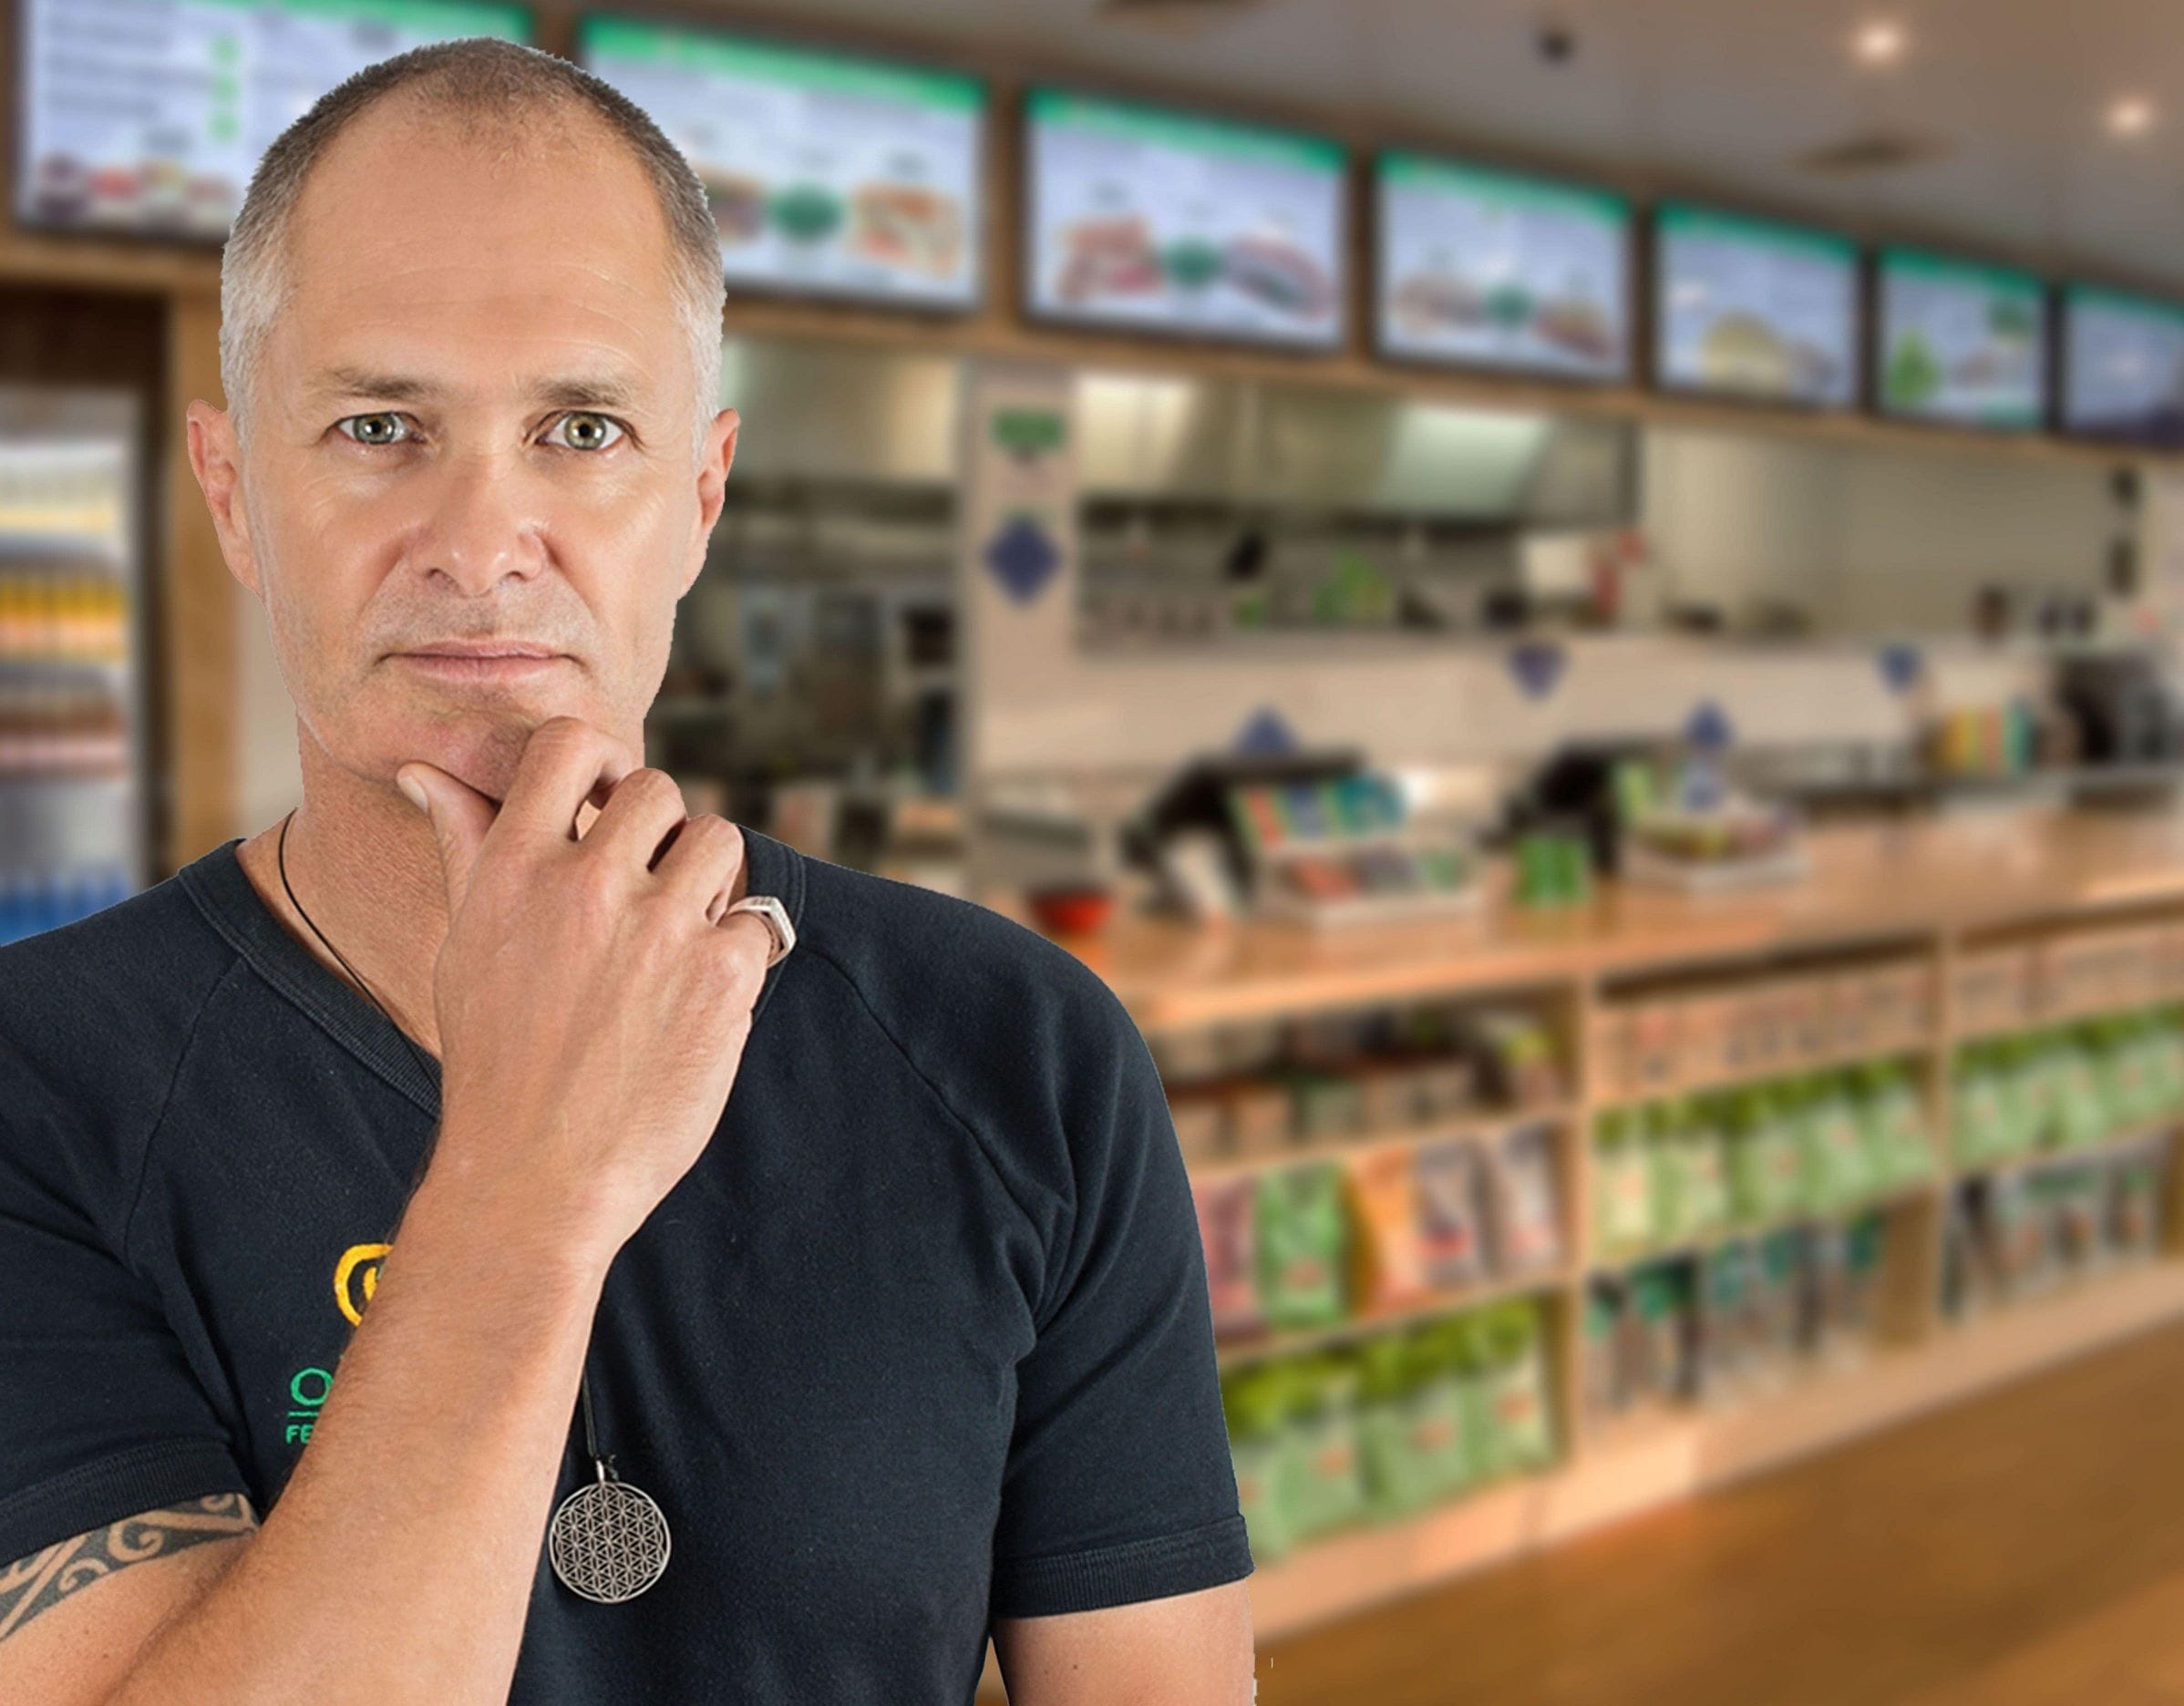 Oliver's Real Food founder departs again amidst question marks over financials